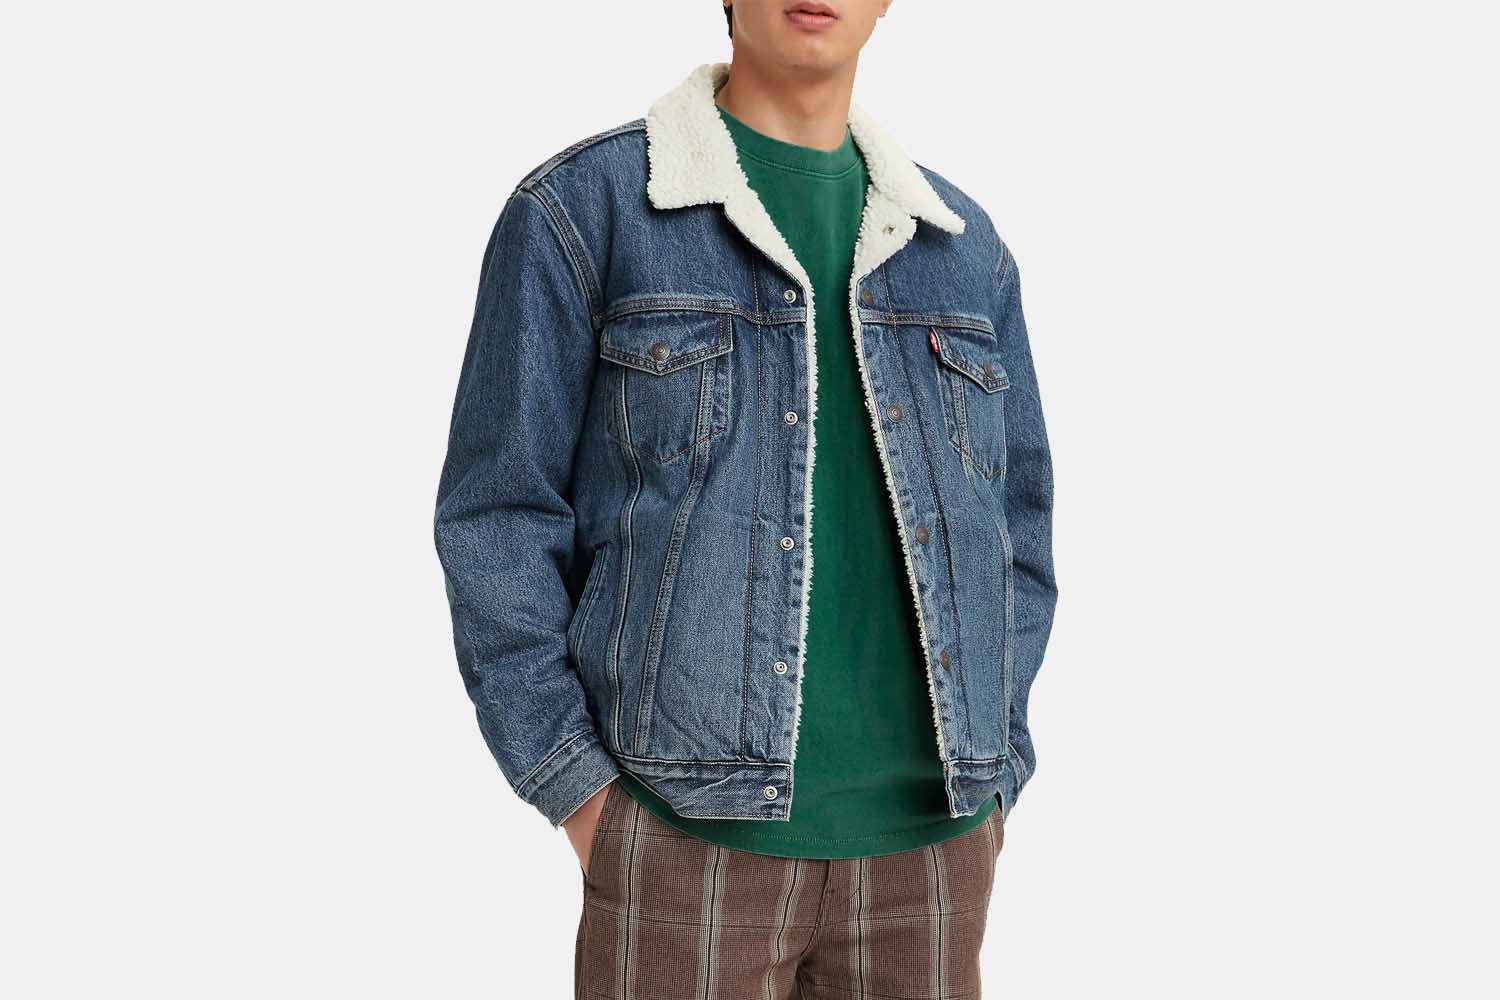 A man wearing a sherpa-lined trucker jacket from Levi's, done up in denim, with a green shirt